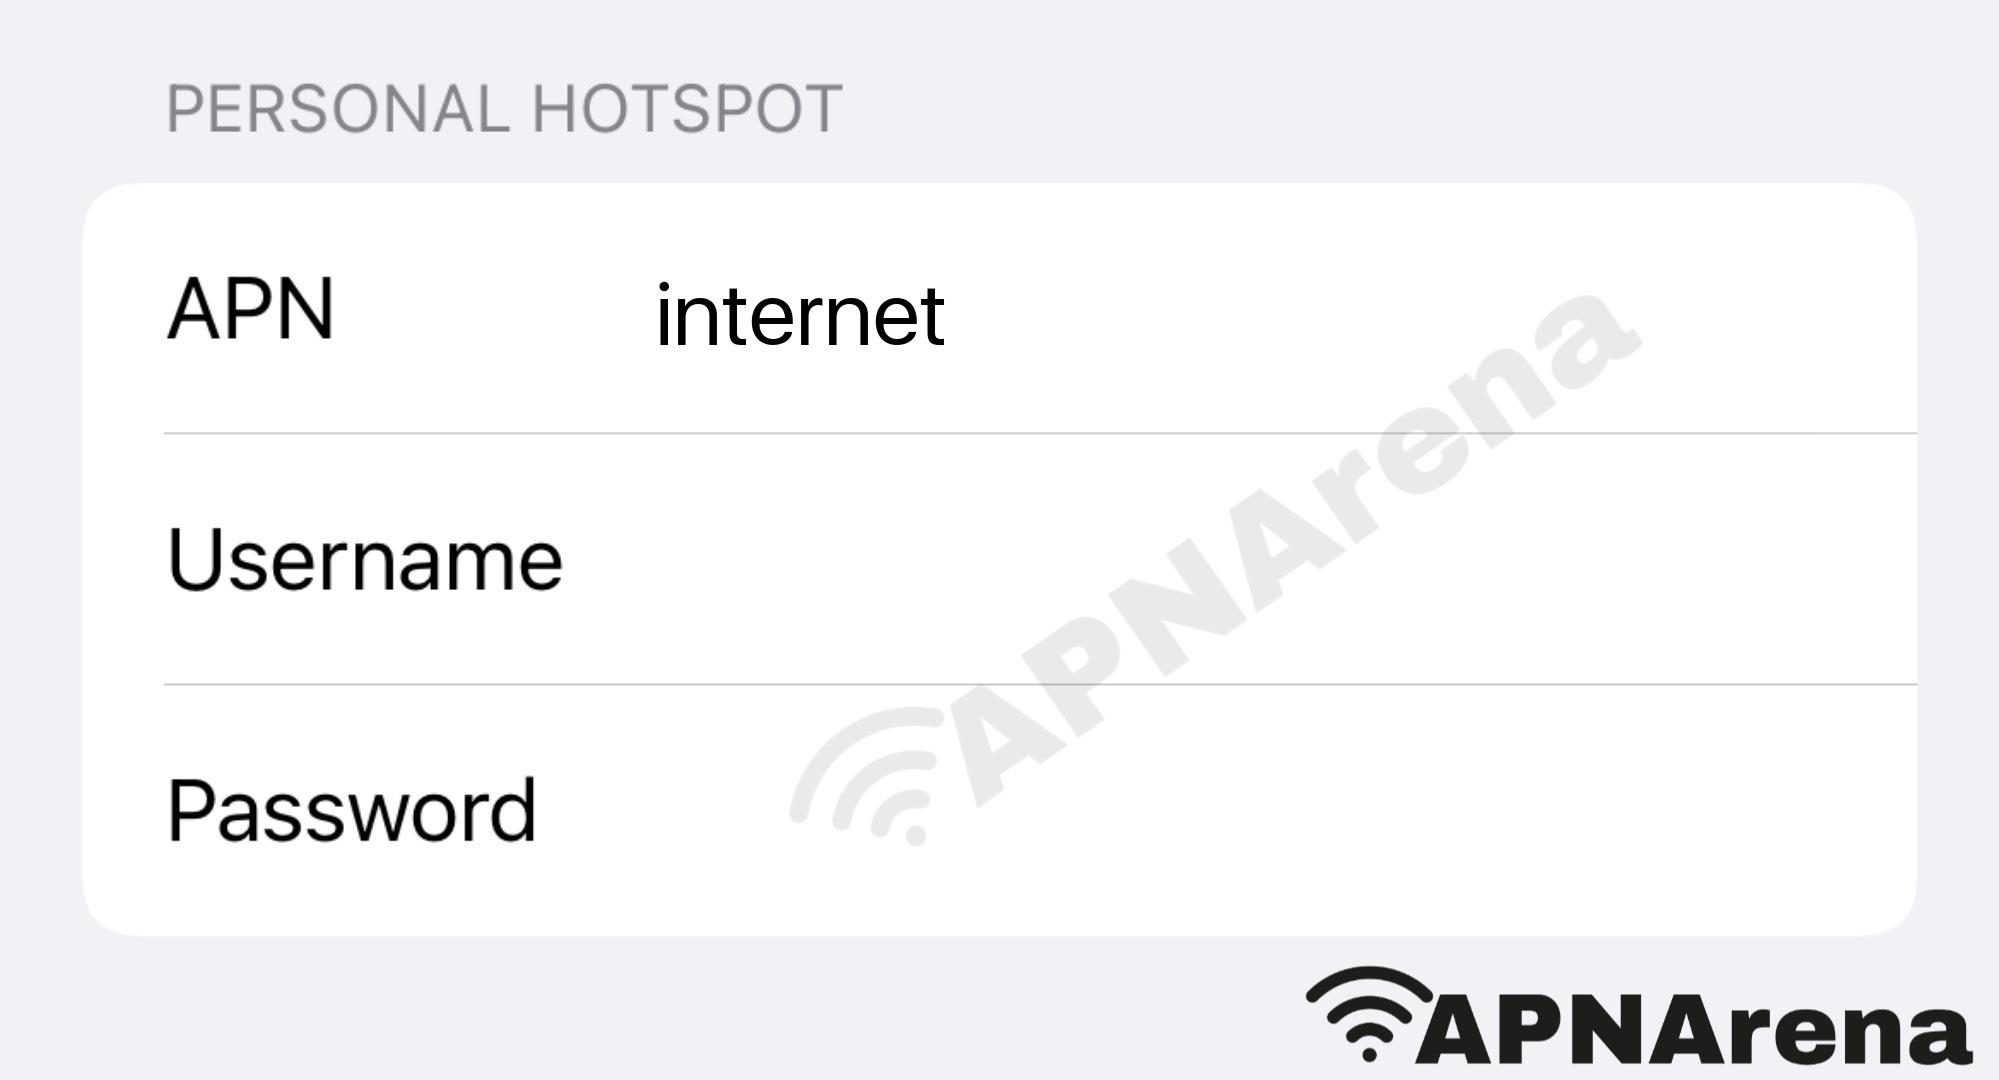 iPrimus Personal Hotspot Settings for iPhone